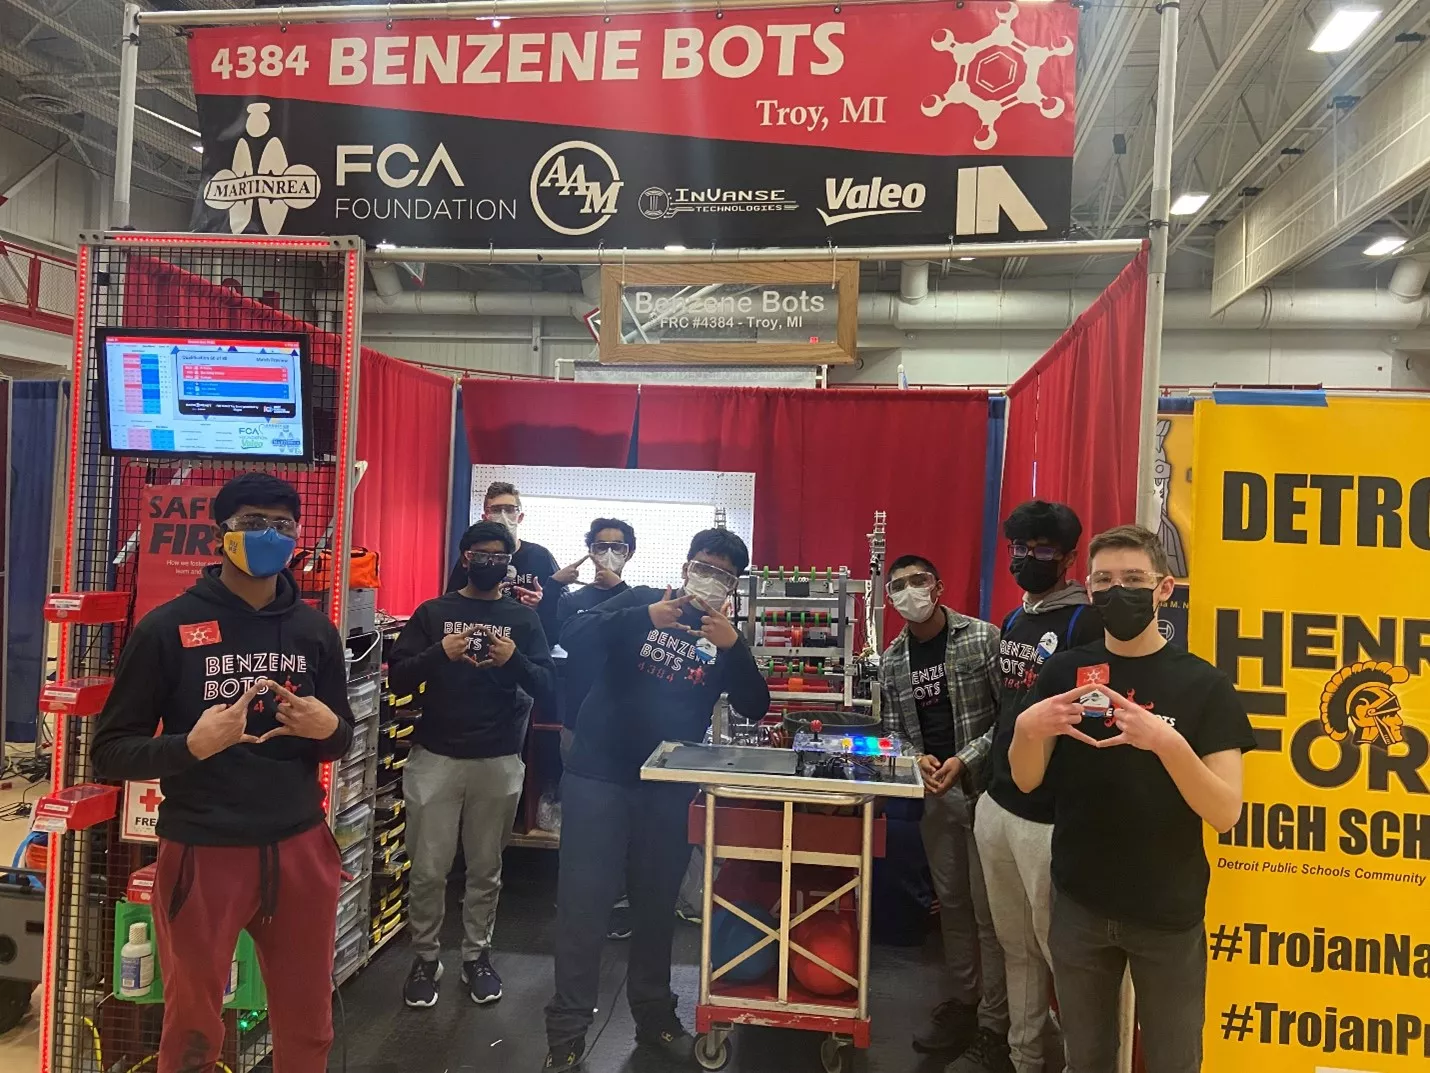 Benzene Bots from Troy Michigan (Image Courtesy of SOLIDWORKS)